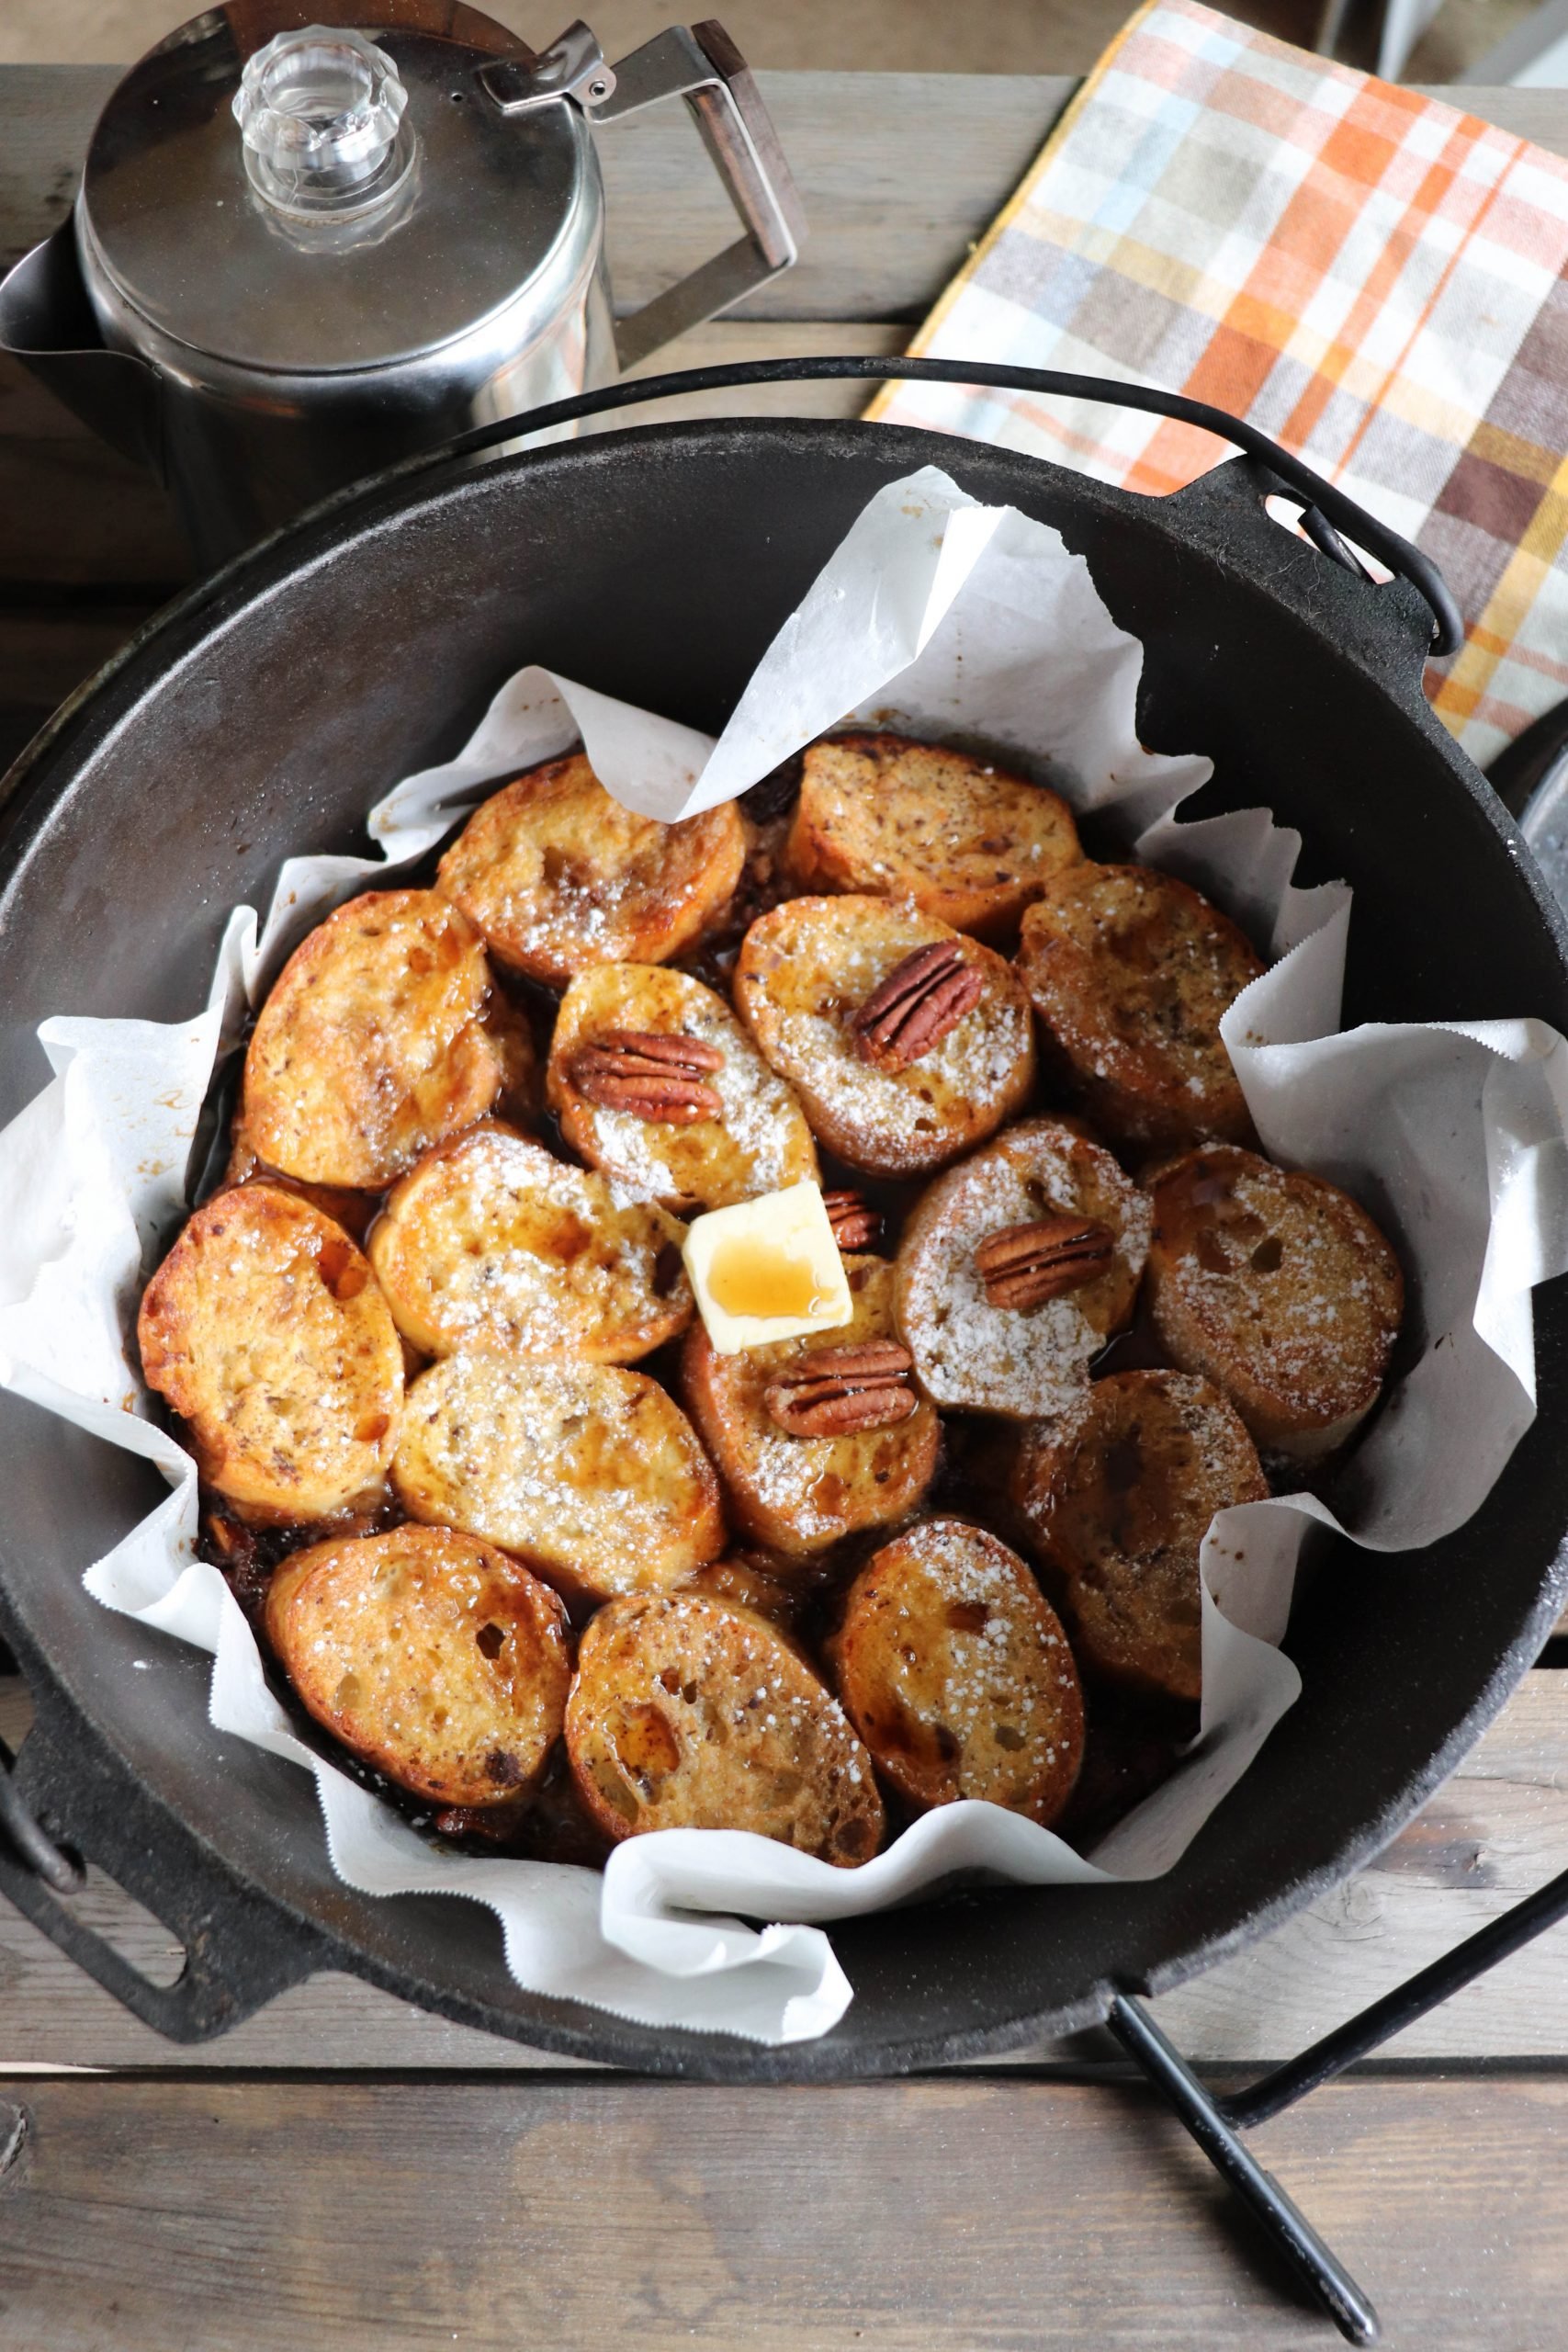 https://campfirefoodie.com/wp-content/uploads/2021/03/Dutch-Oven-French-Toast-Casserole-23-scaled.jpg